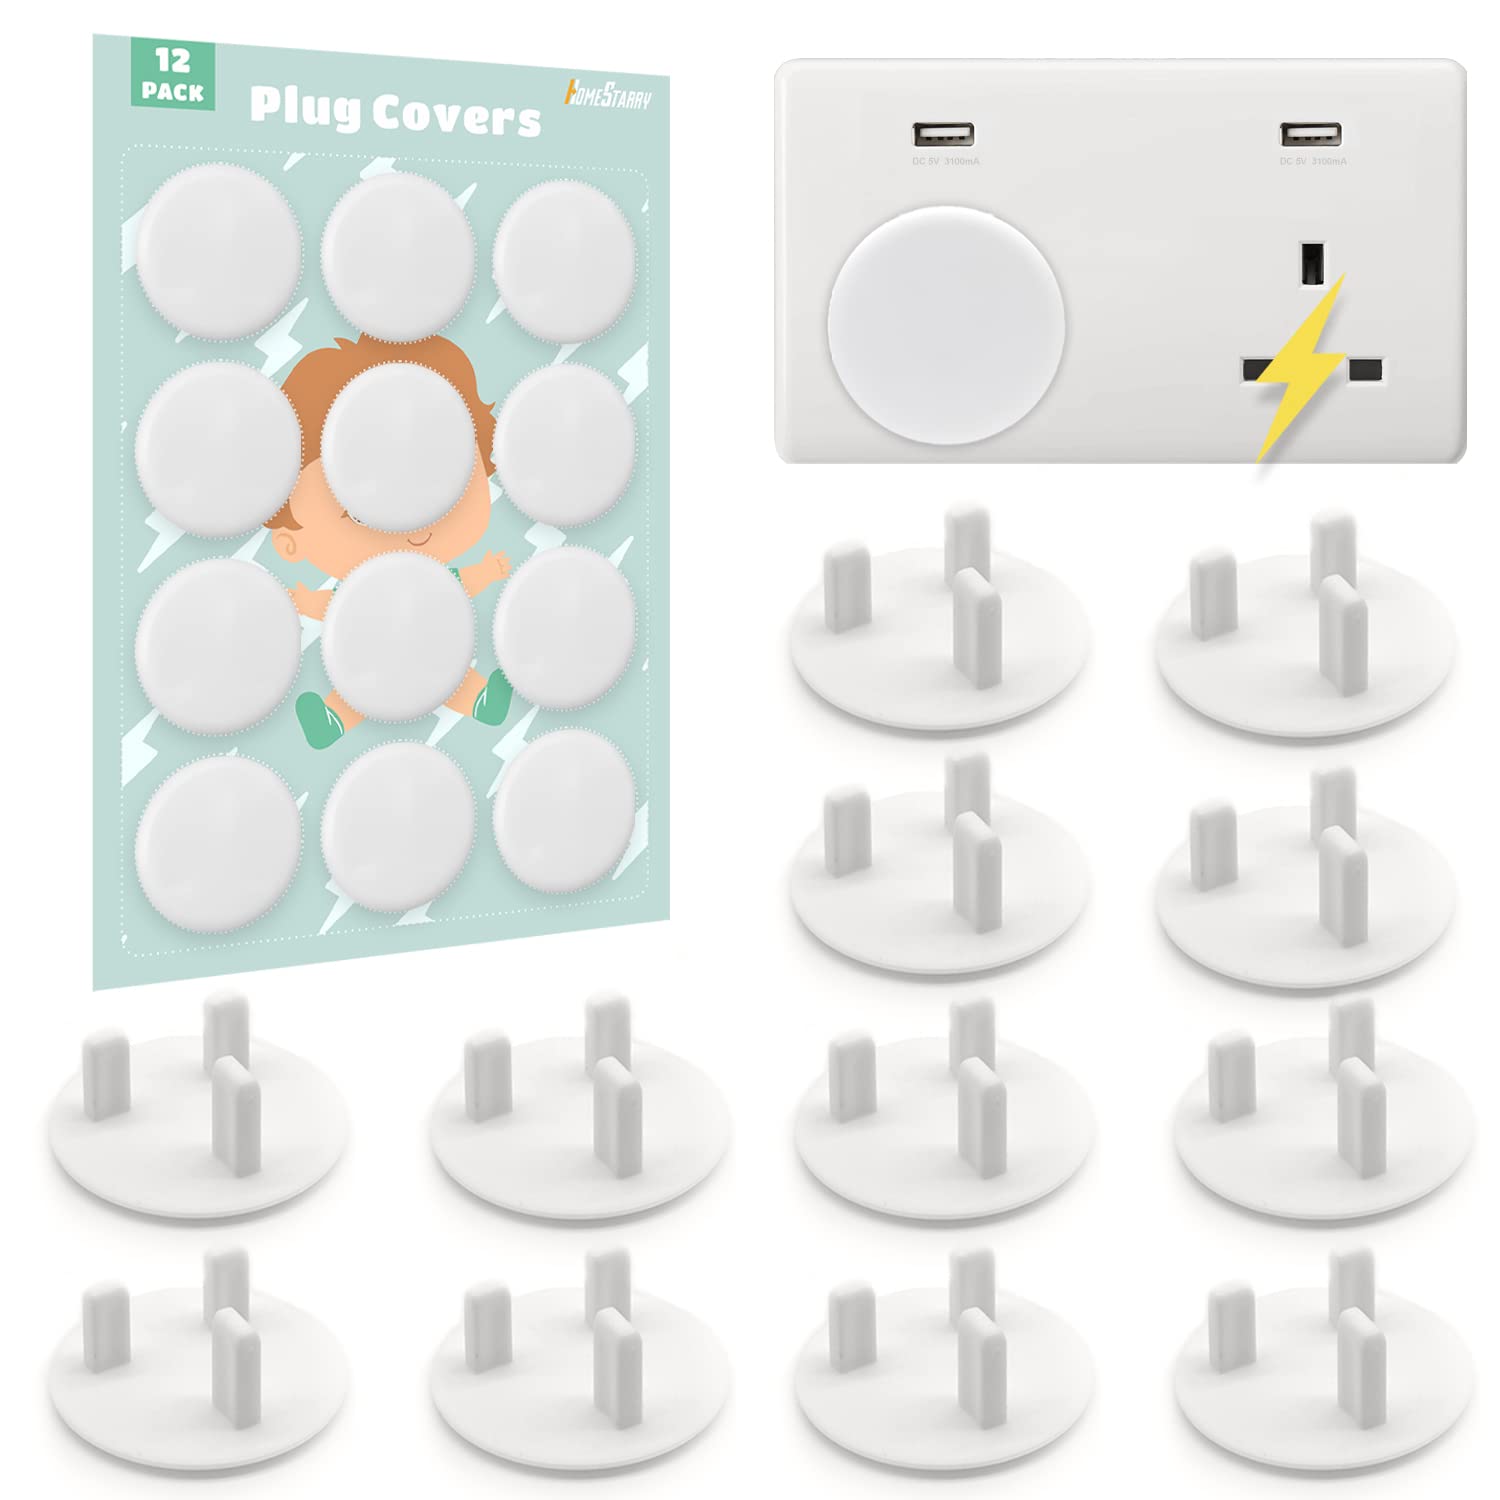 Plug Socket Covers, 12 Pieces White Socket Protectors, Childproof Outlet Protector Plug Covers Safety Caps Socket Covers UK, Protect for Toddlers & Babies Safety at Home & School